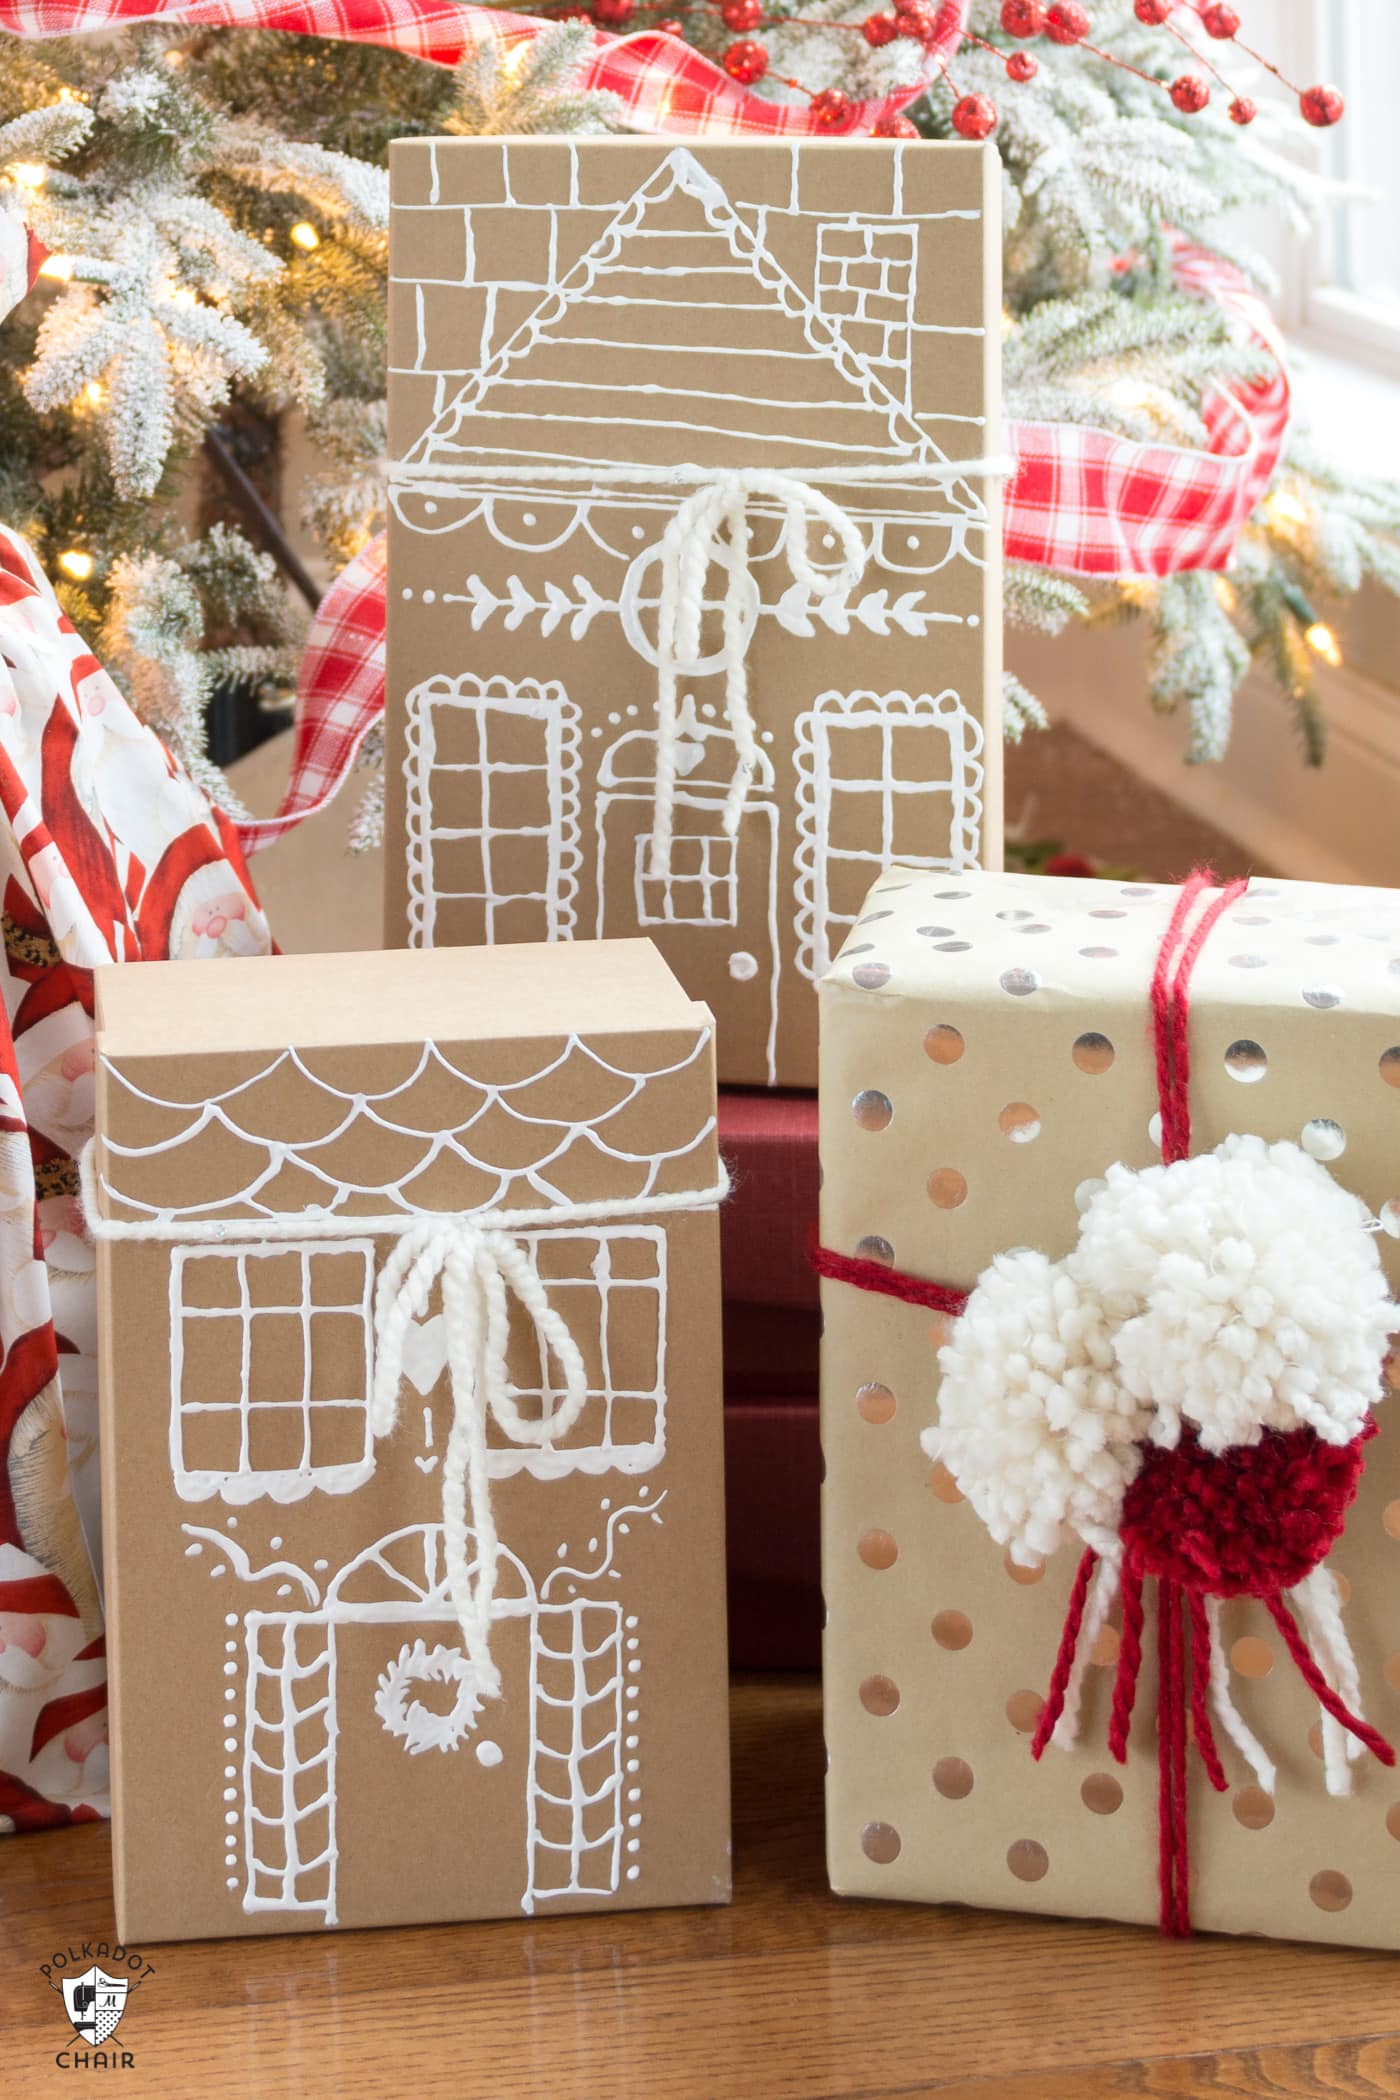 Gingerbread house paper gift boxes in front of the Christmas tree